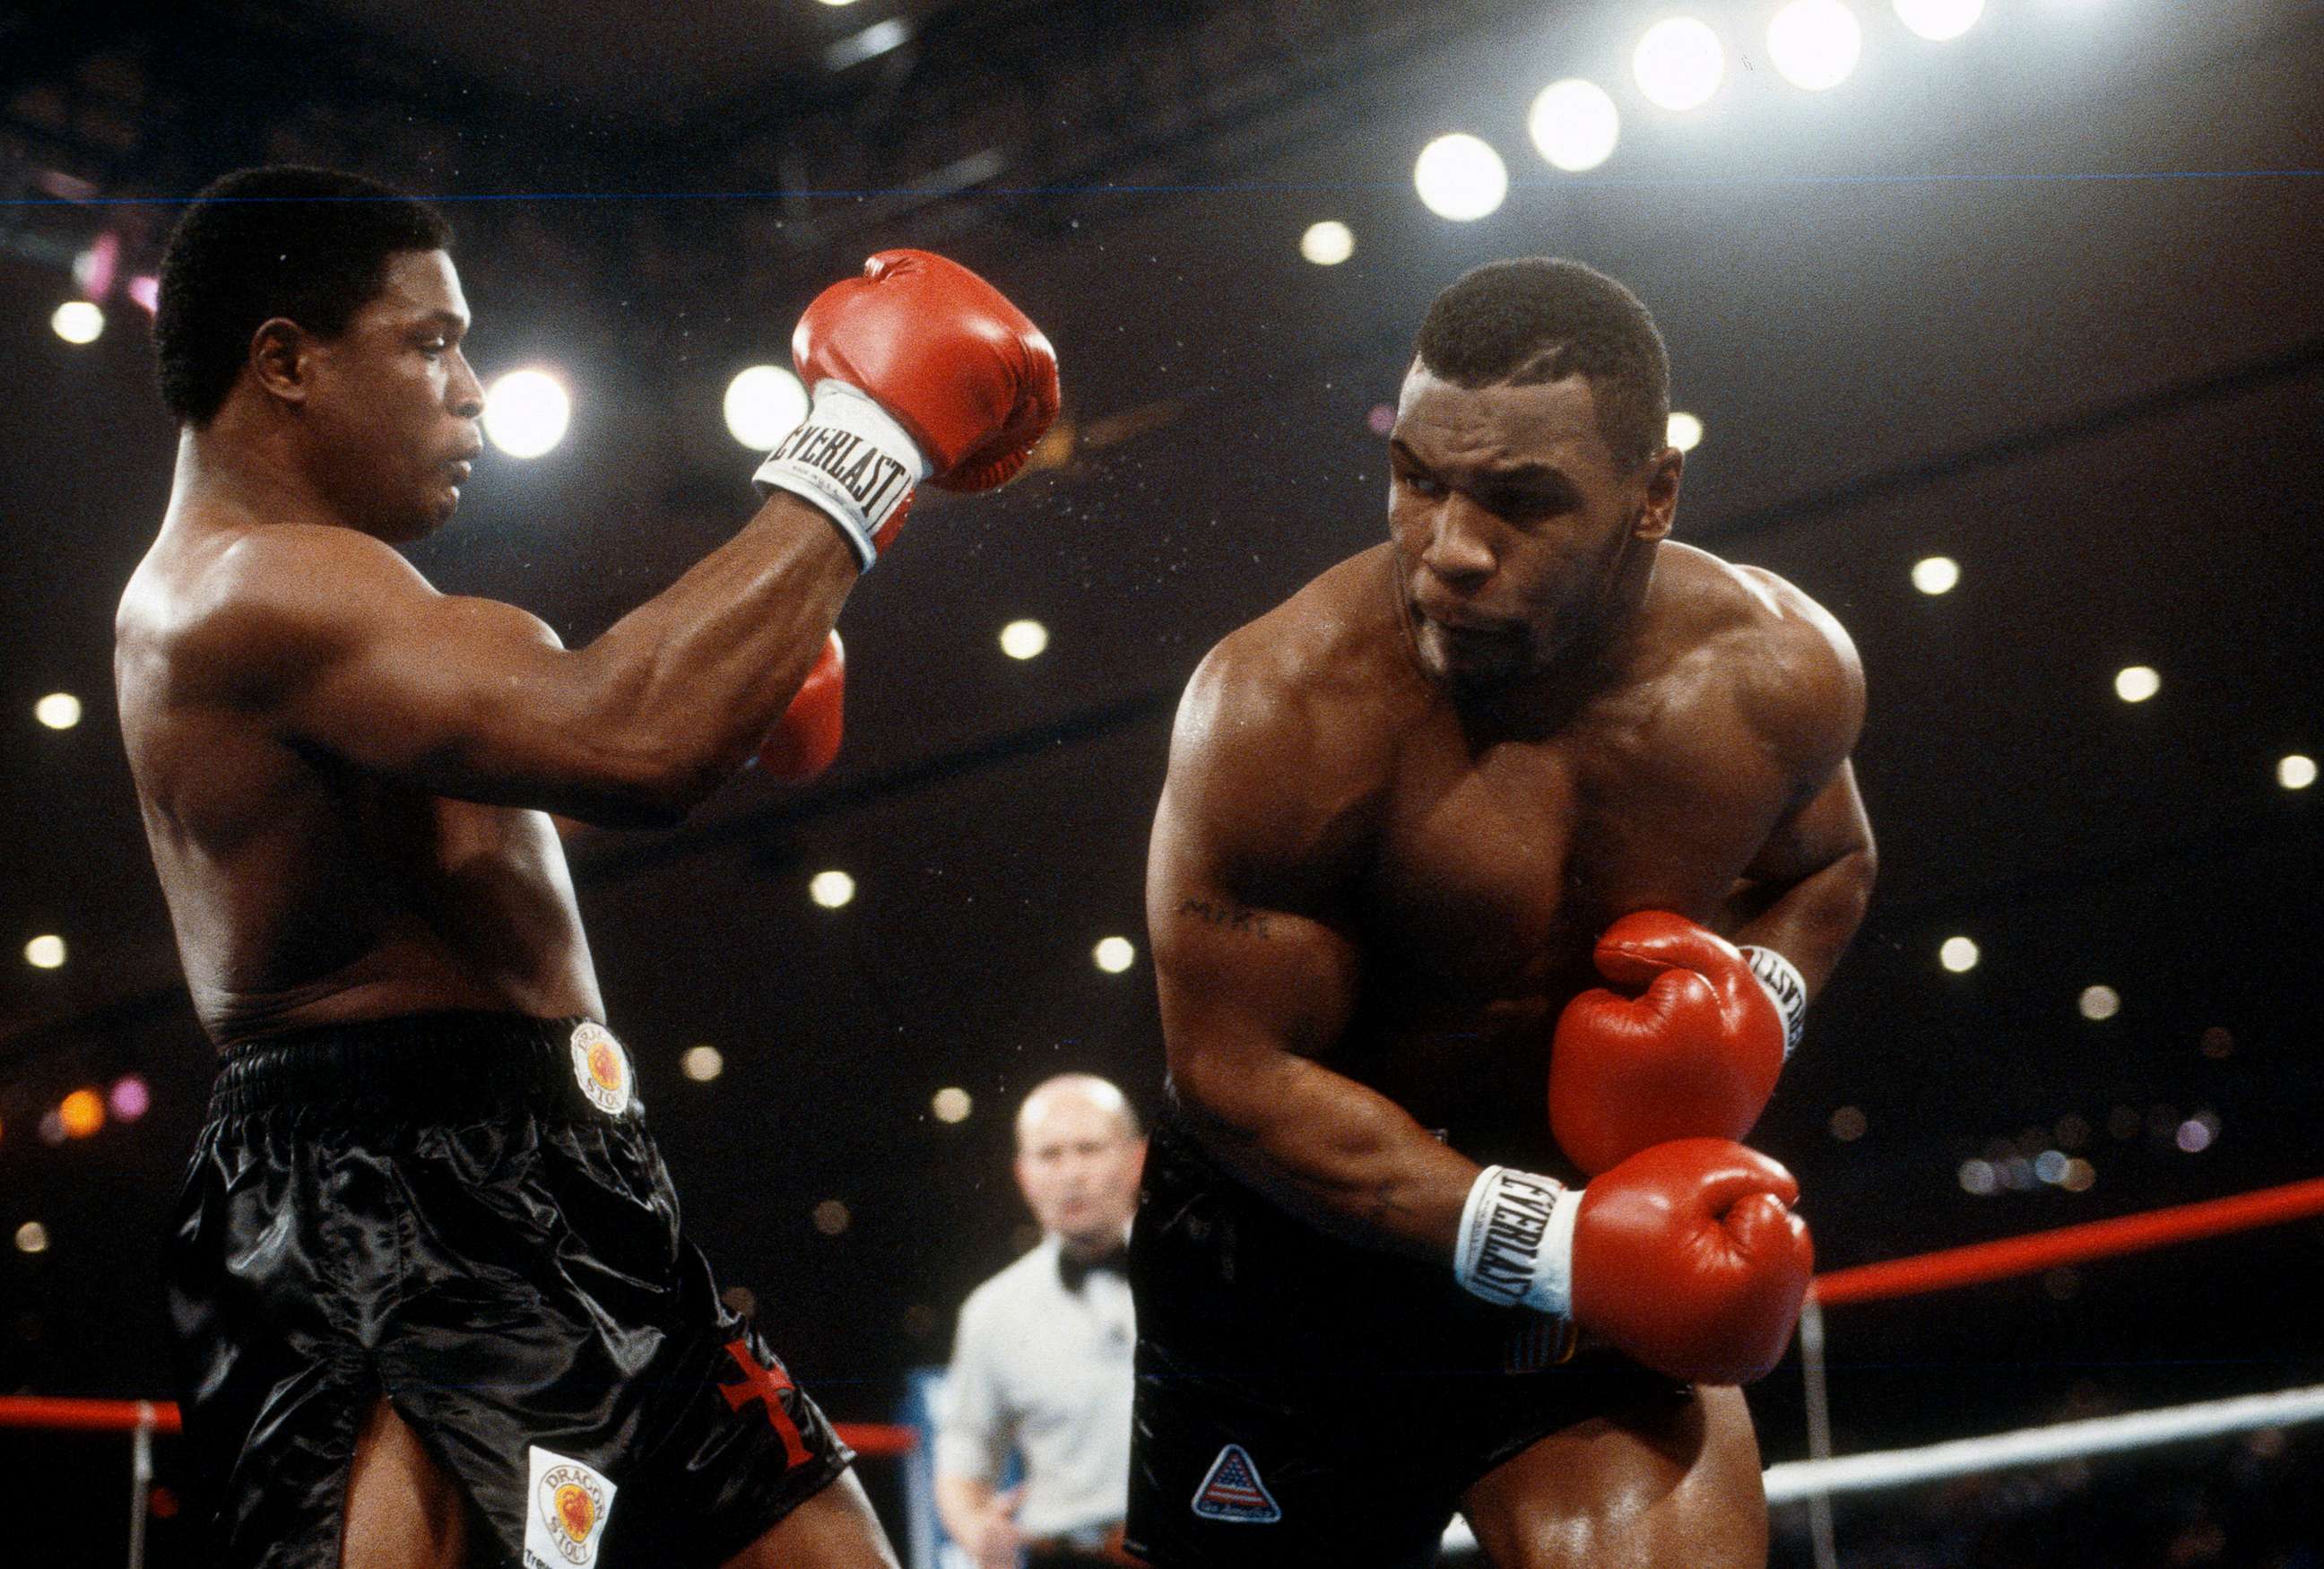 PHOTO: Mike Tyson and Trevor Berbick fights for the WBC Heavyweight title on Nov. 22, 1986 at the Las Vegas Hilton in Las Vegas.